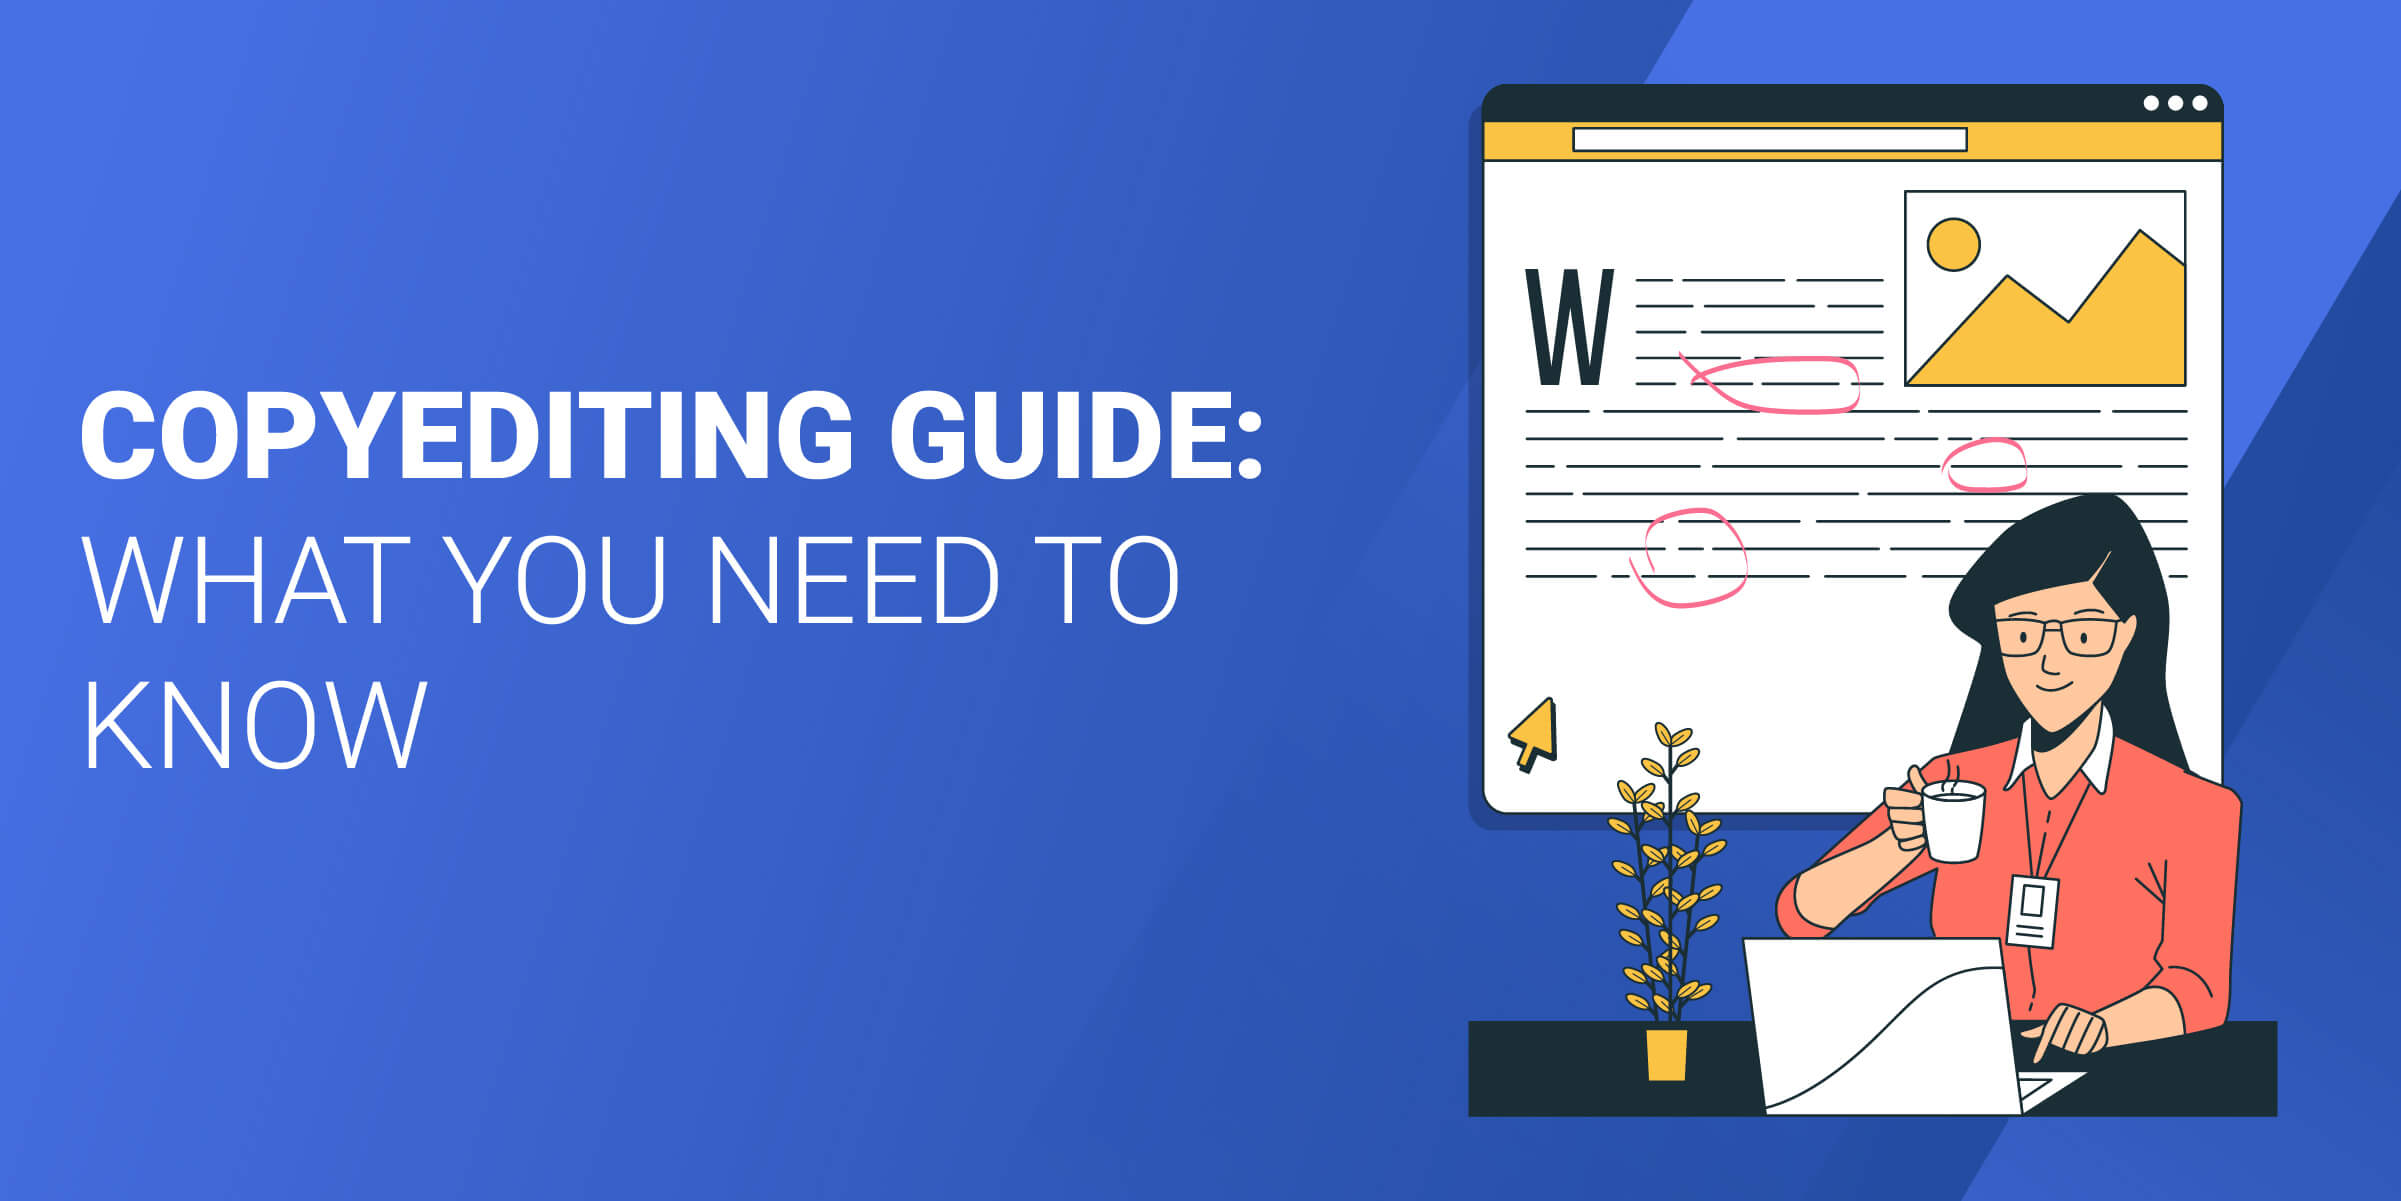 Copyediting Guide What You Need to Know